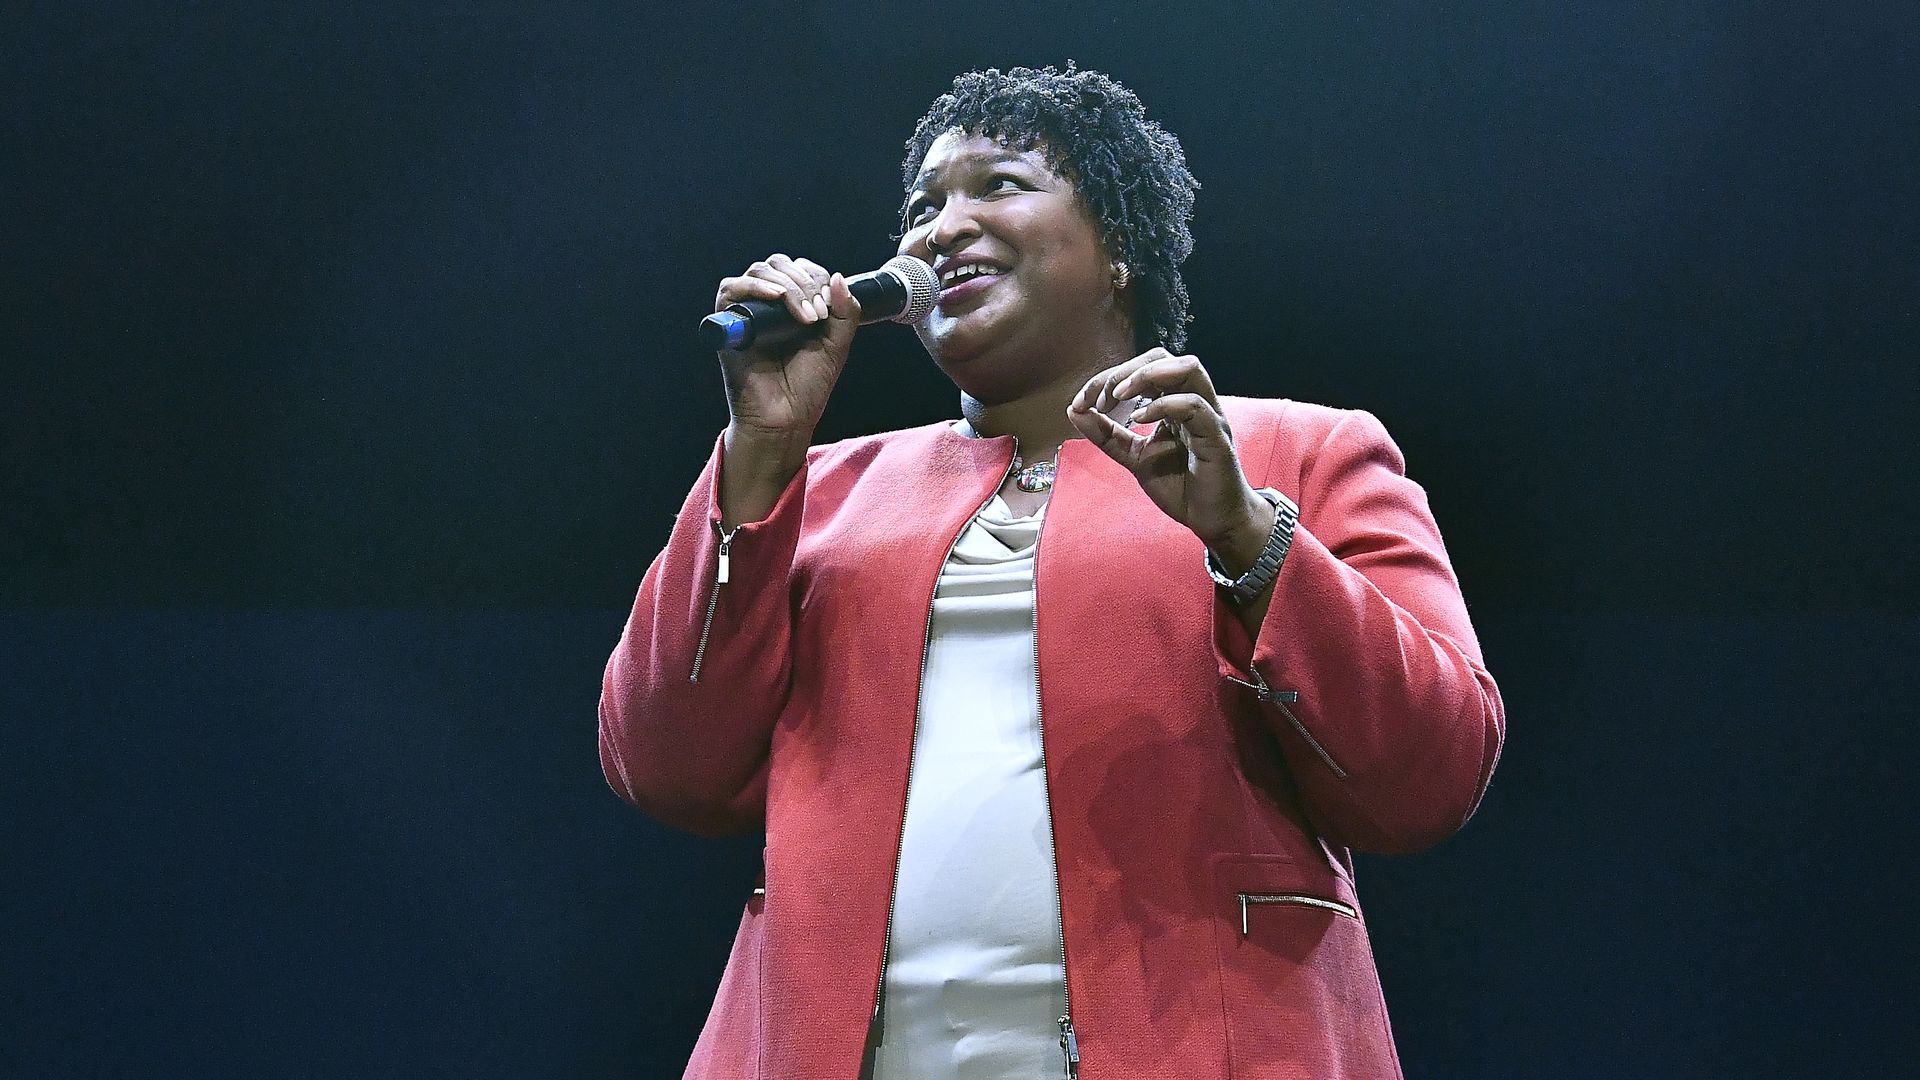 Stacey Abrams democratic cadidate for georgia governor.